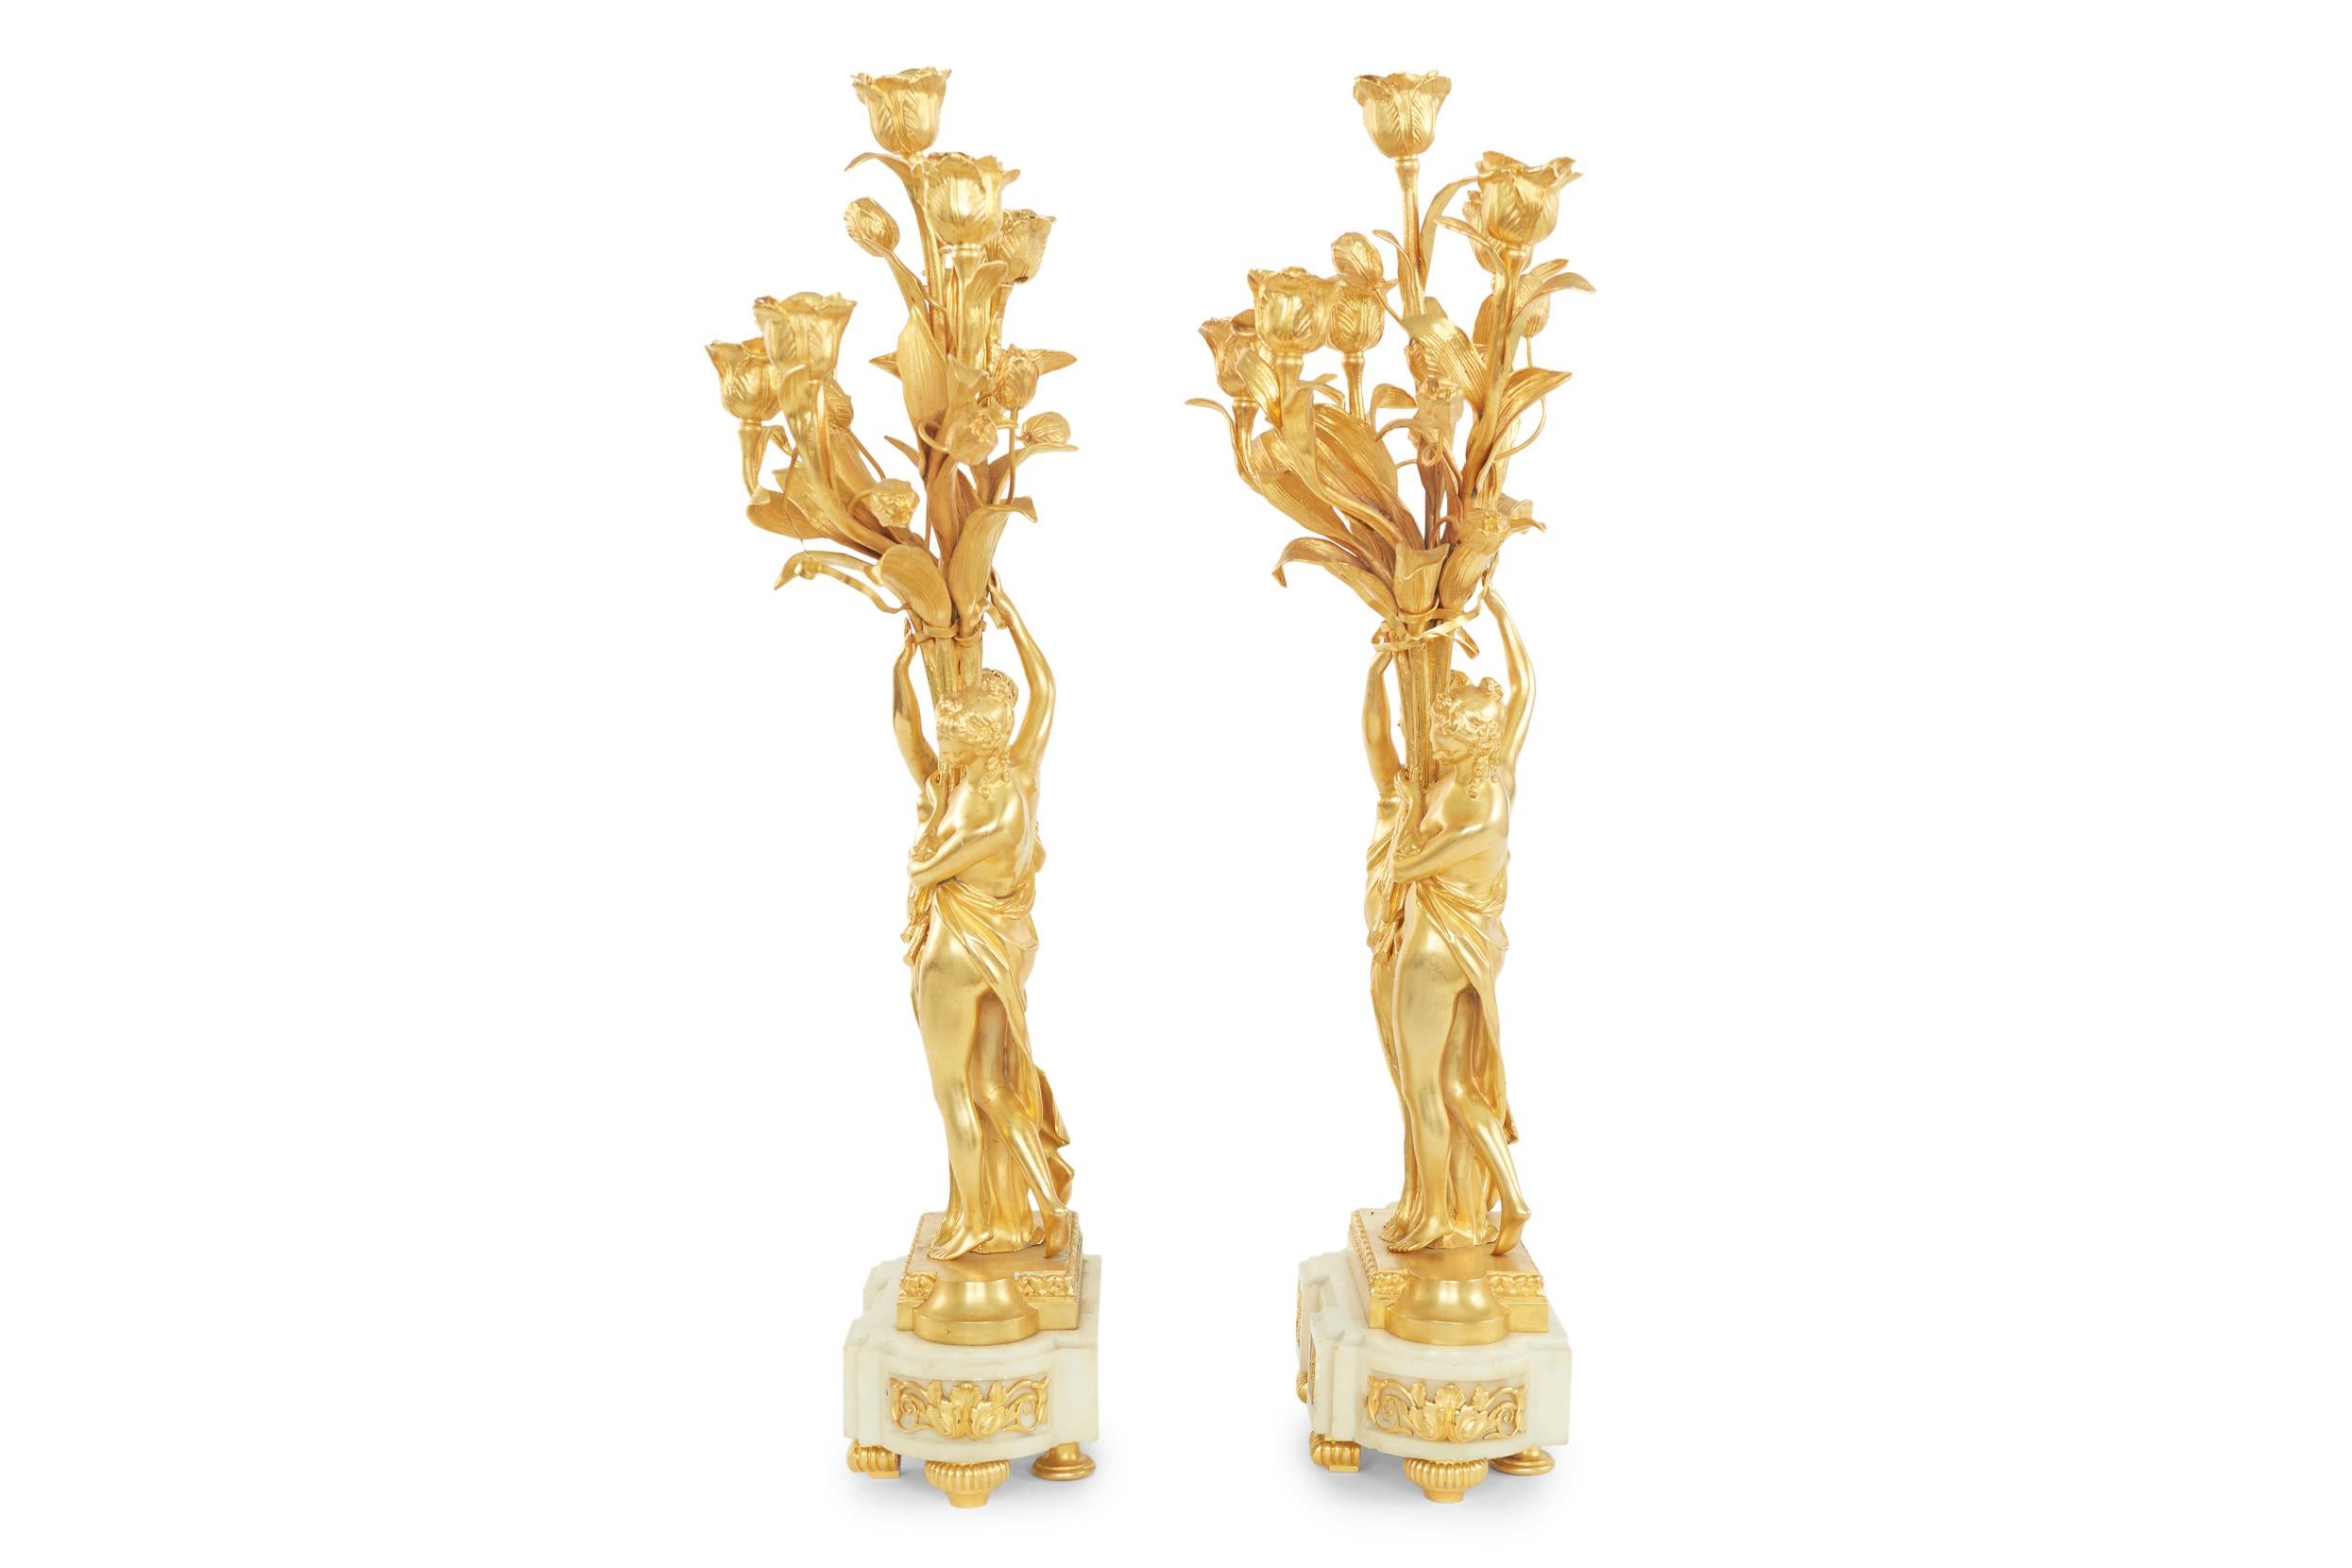 19th century pair of gilt bronze ormolu / marble Louis XV style six light gilt candelabras. Each candelabra featuring with a pair of barefooted maidens draped in fabric with matching buns with rosettes, each holding up the candelabra arms shaped